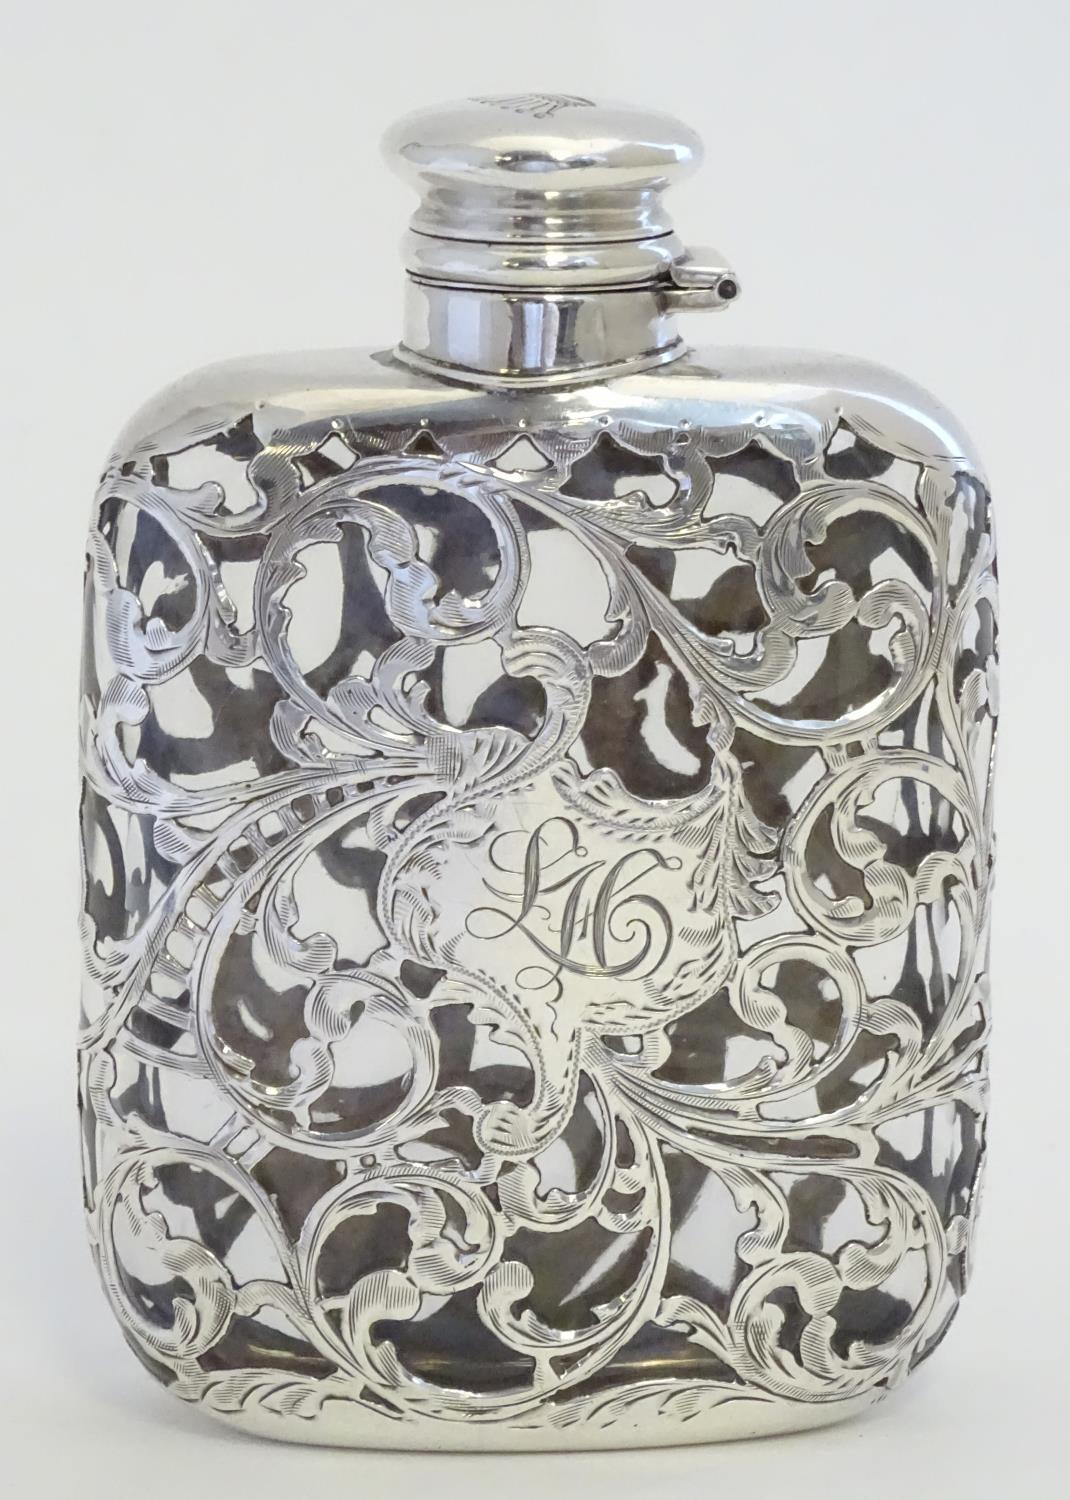 A Victorian hip flask, the glass flask with ornate silver mounts with acanthus scroll detail - Image 2 of 7